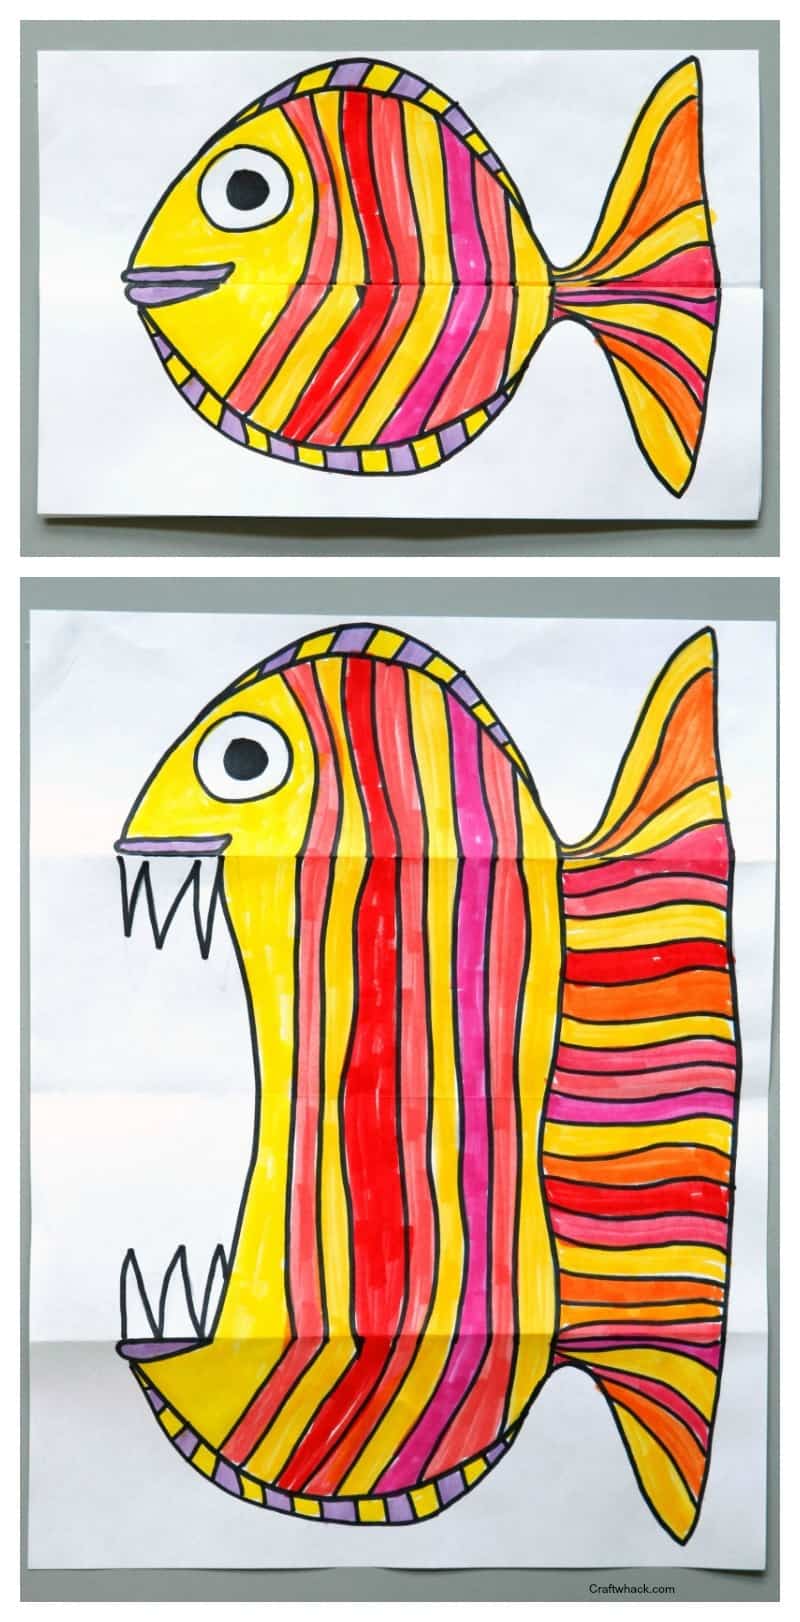 Folding Fish paper art project. Art for kids, easy art projects